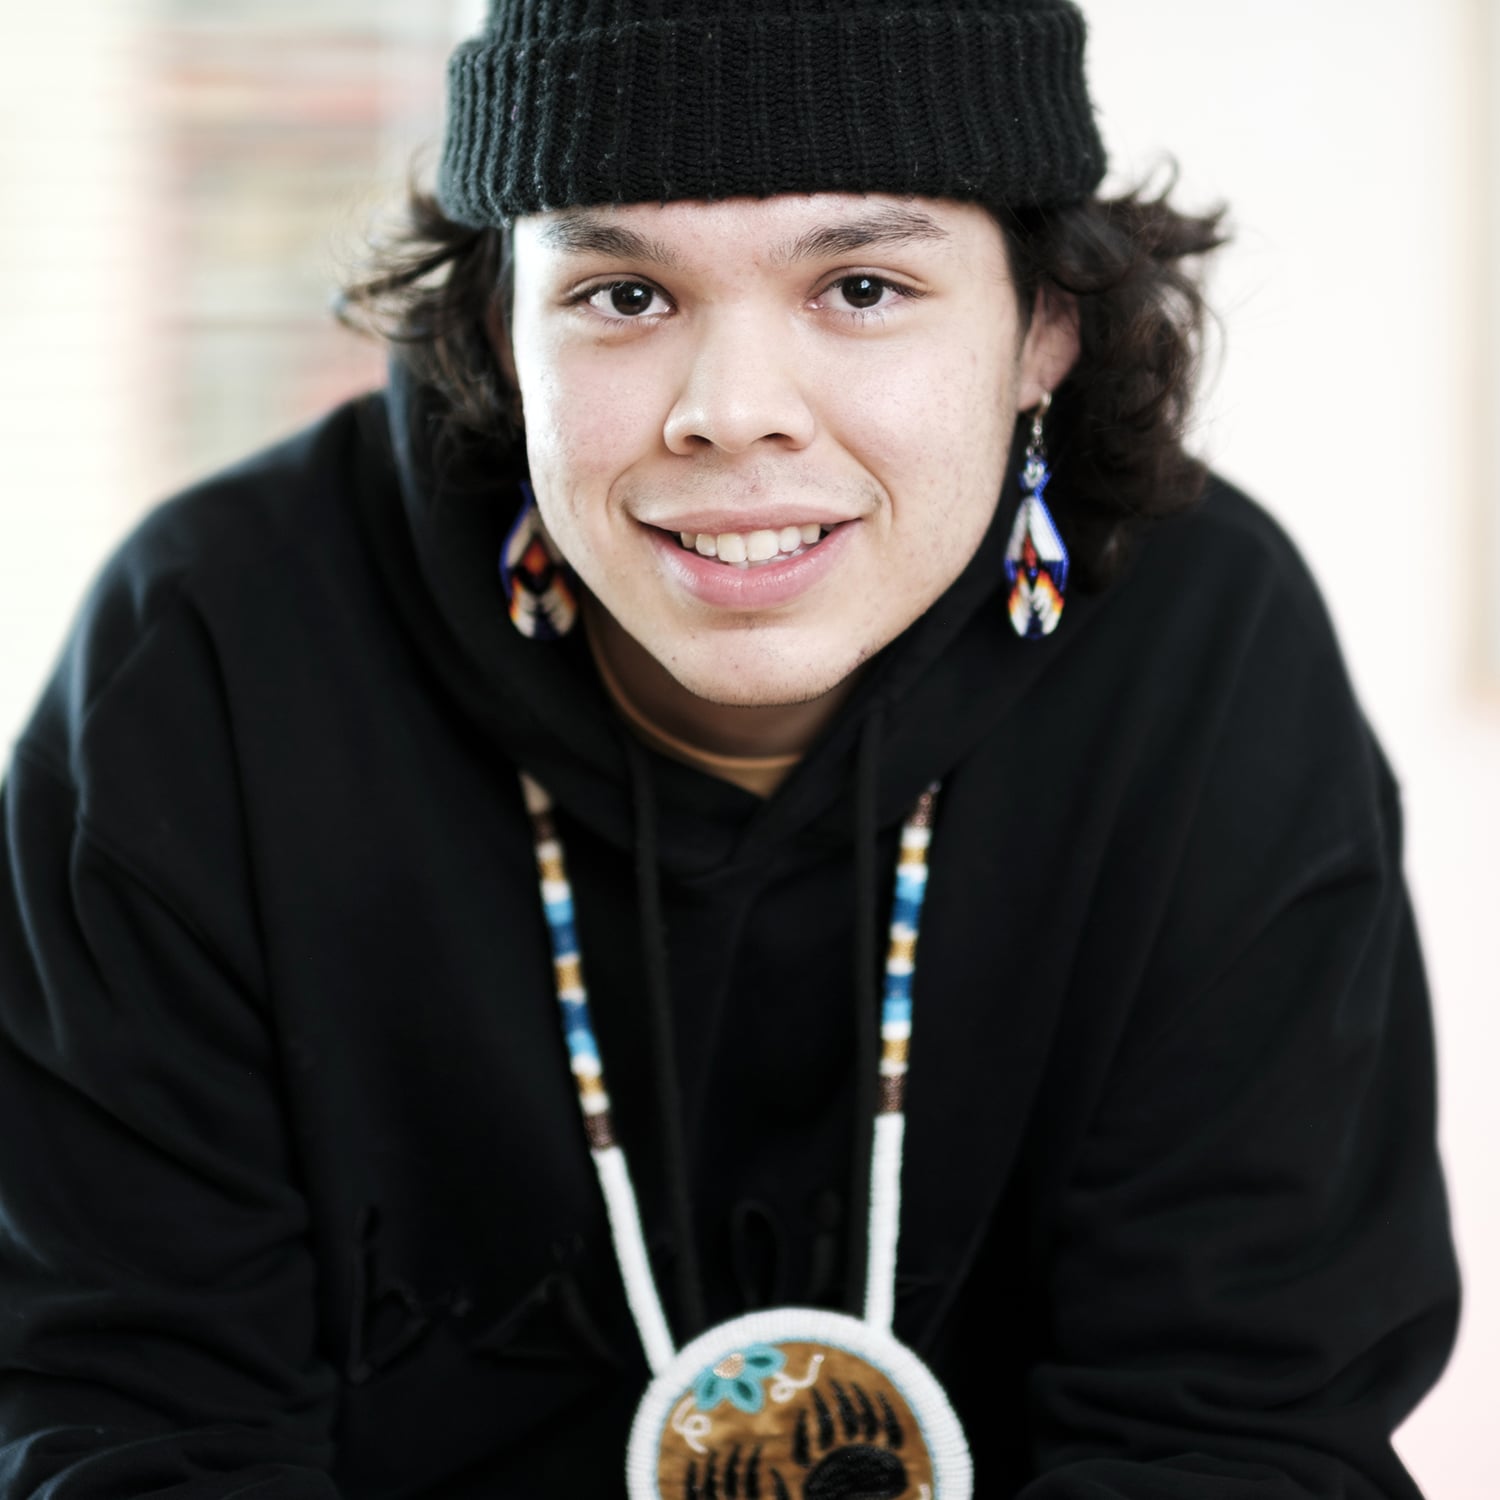 IAIA Names Aiden Deleary as Inaugural Recipient of Chihuly Scholarship